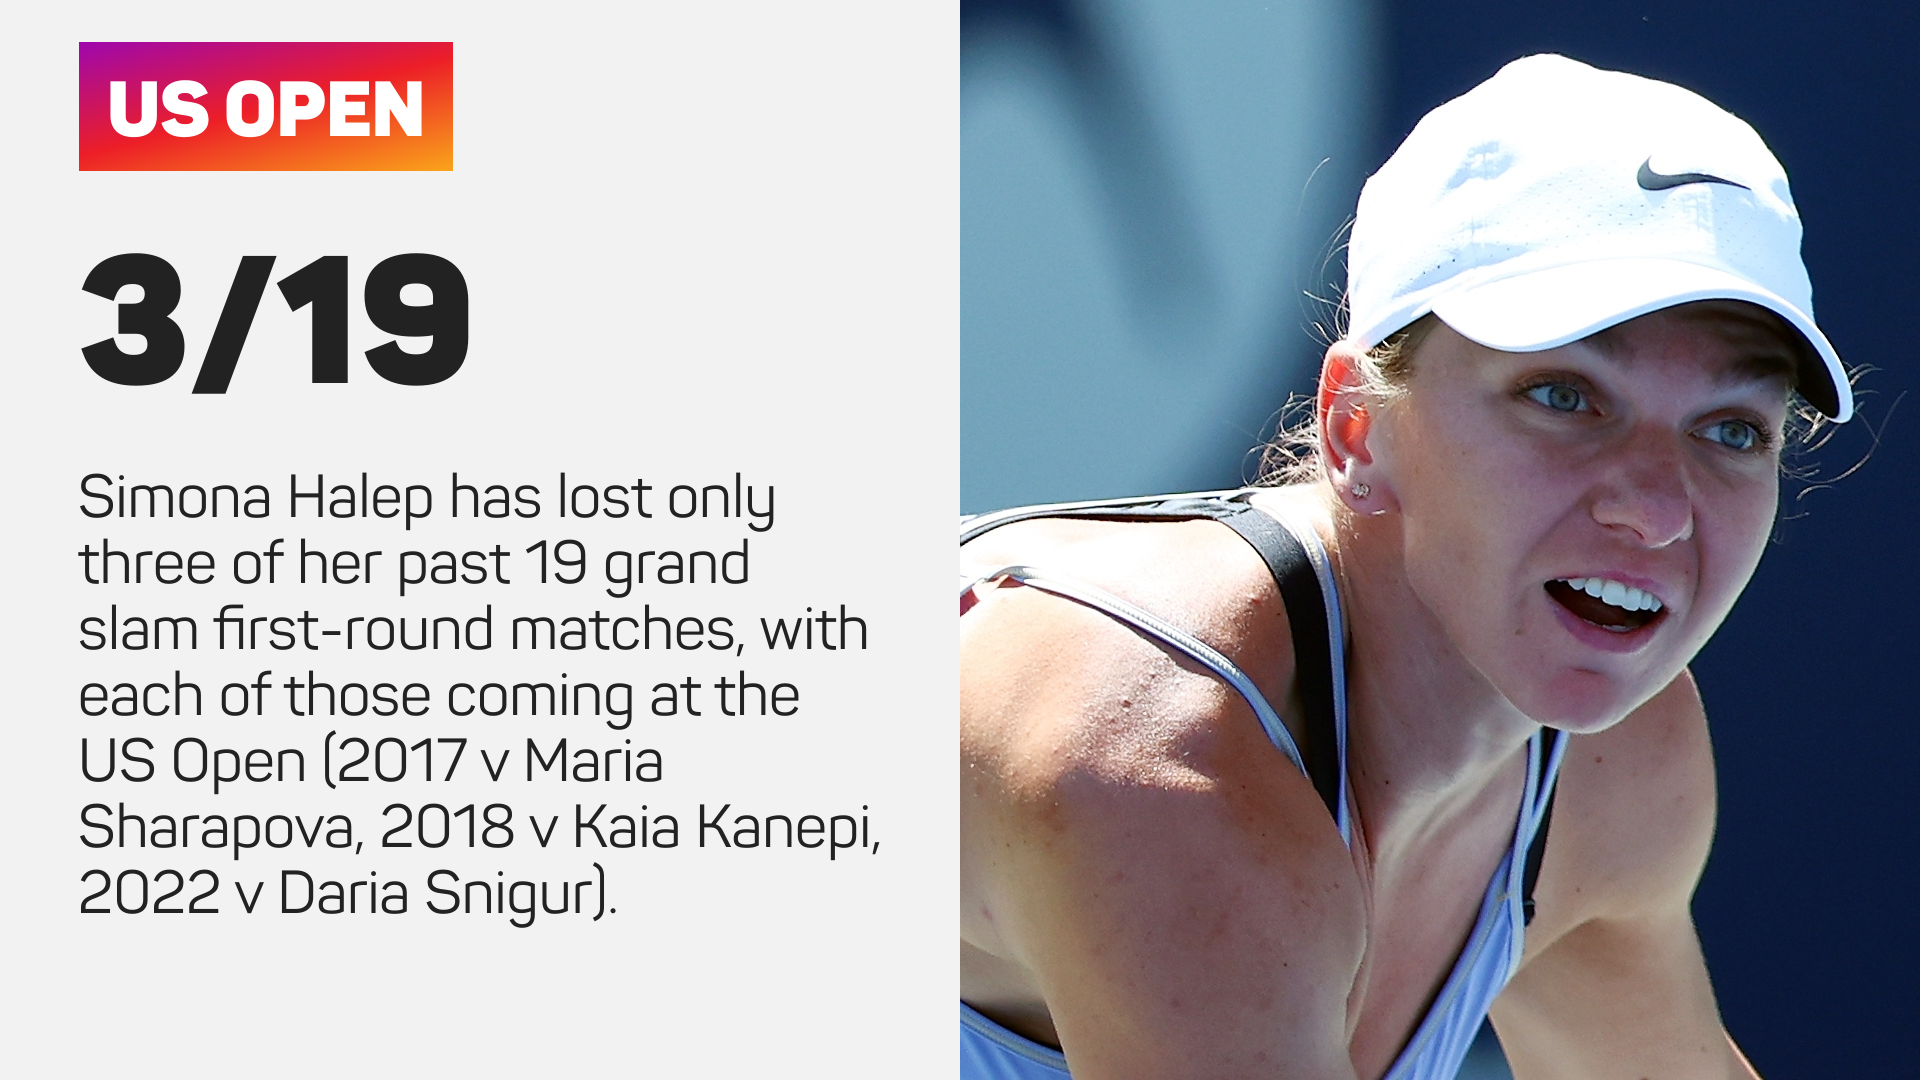 Simona Halep has lost three of her past 19 grand slam first-round matches